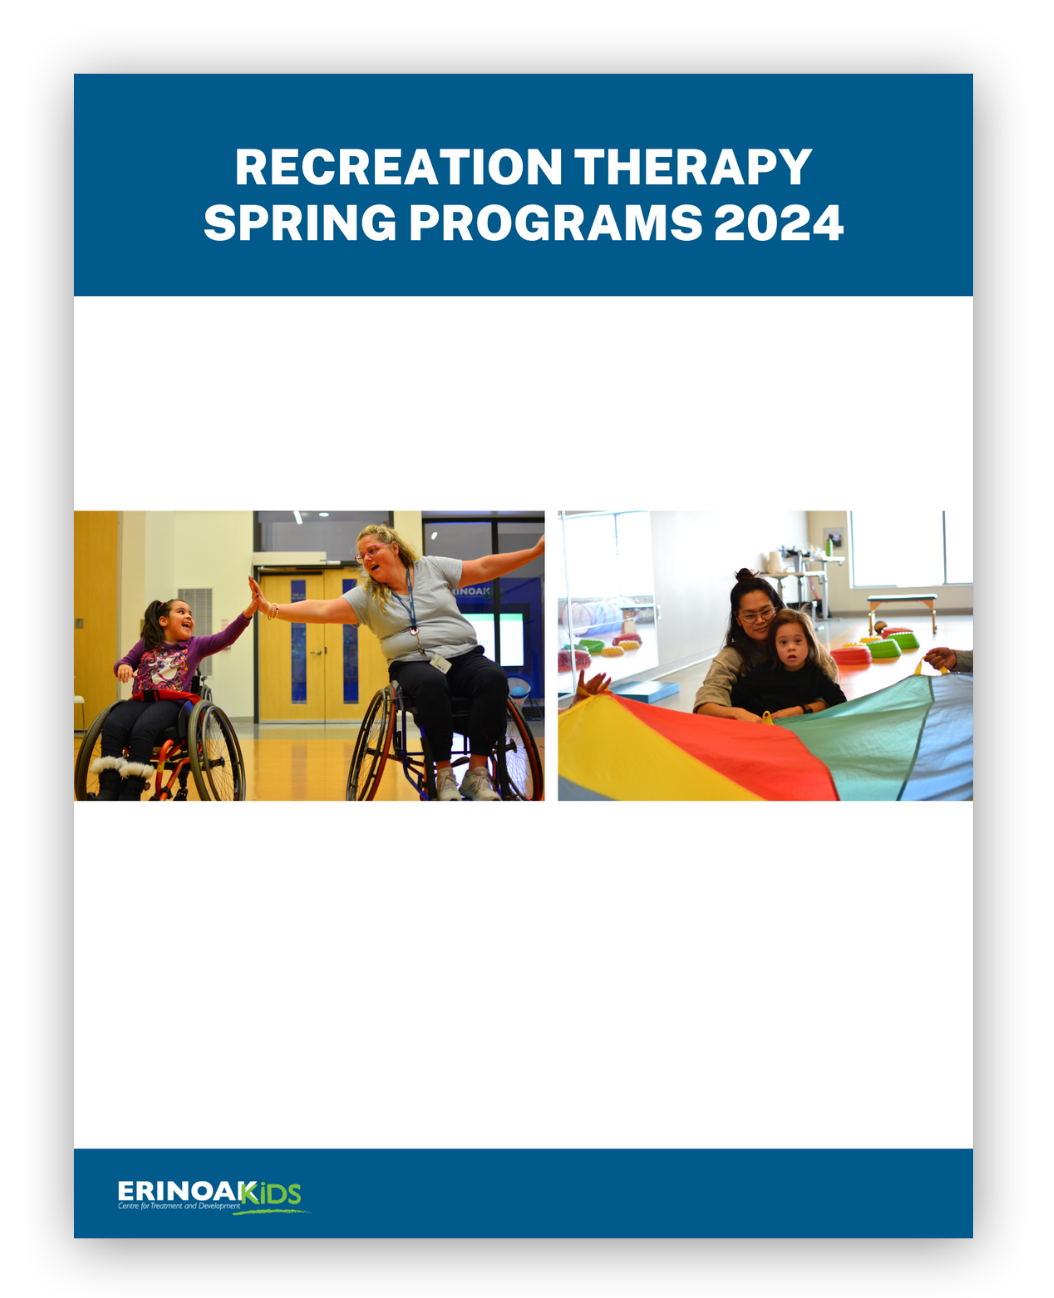 Thumbnail of the Spring Recreation Therapy Groups Program Guide 2024